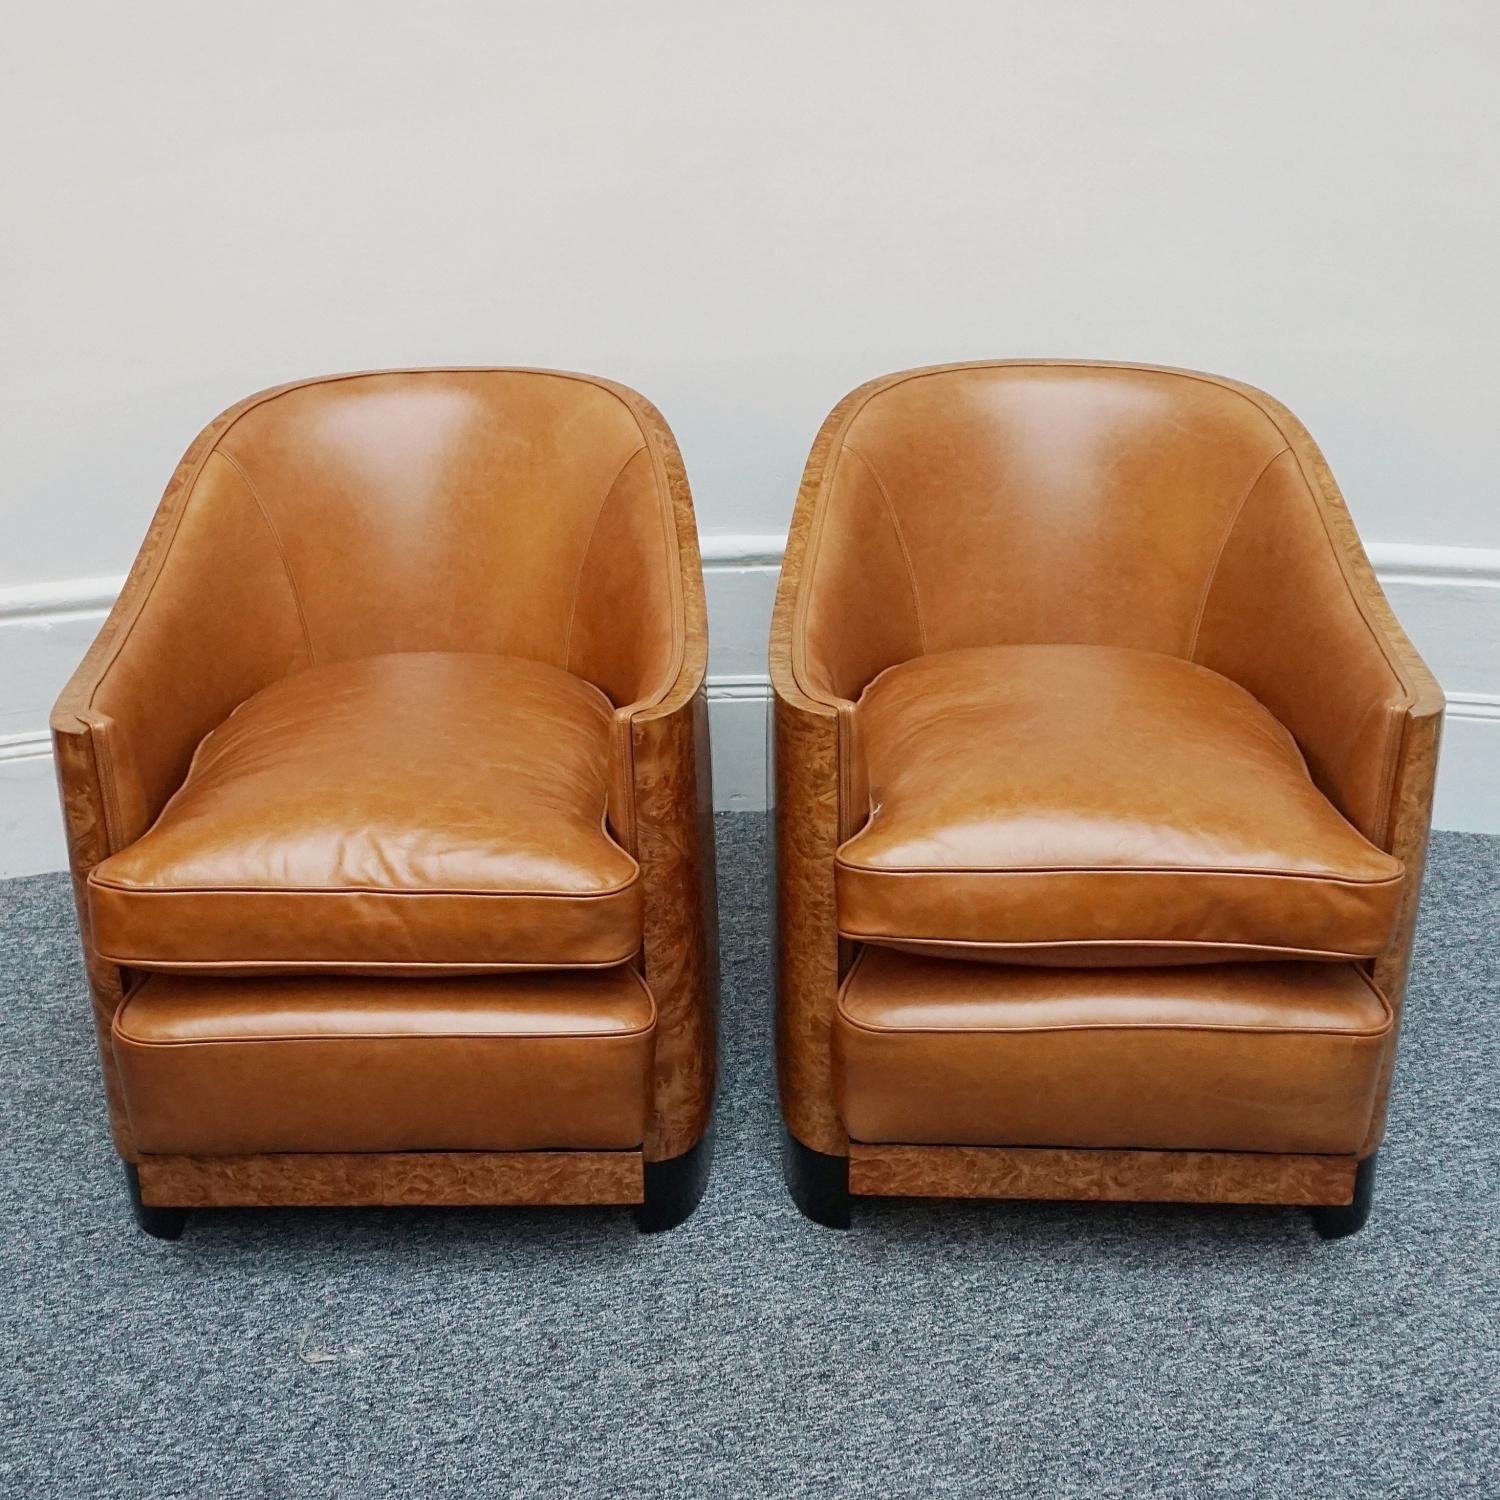 Original 1930s English Art Deco Club Chairs Walnut and Brown Leather 4